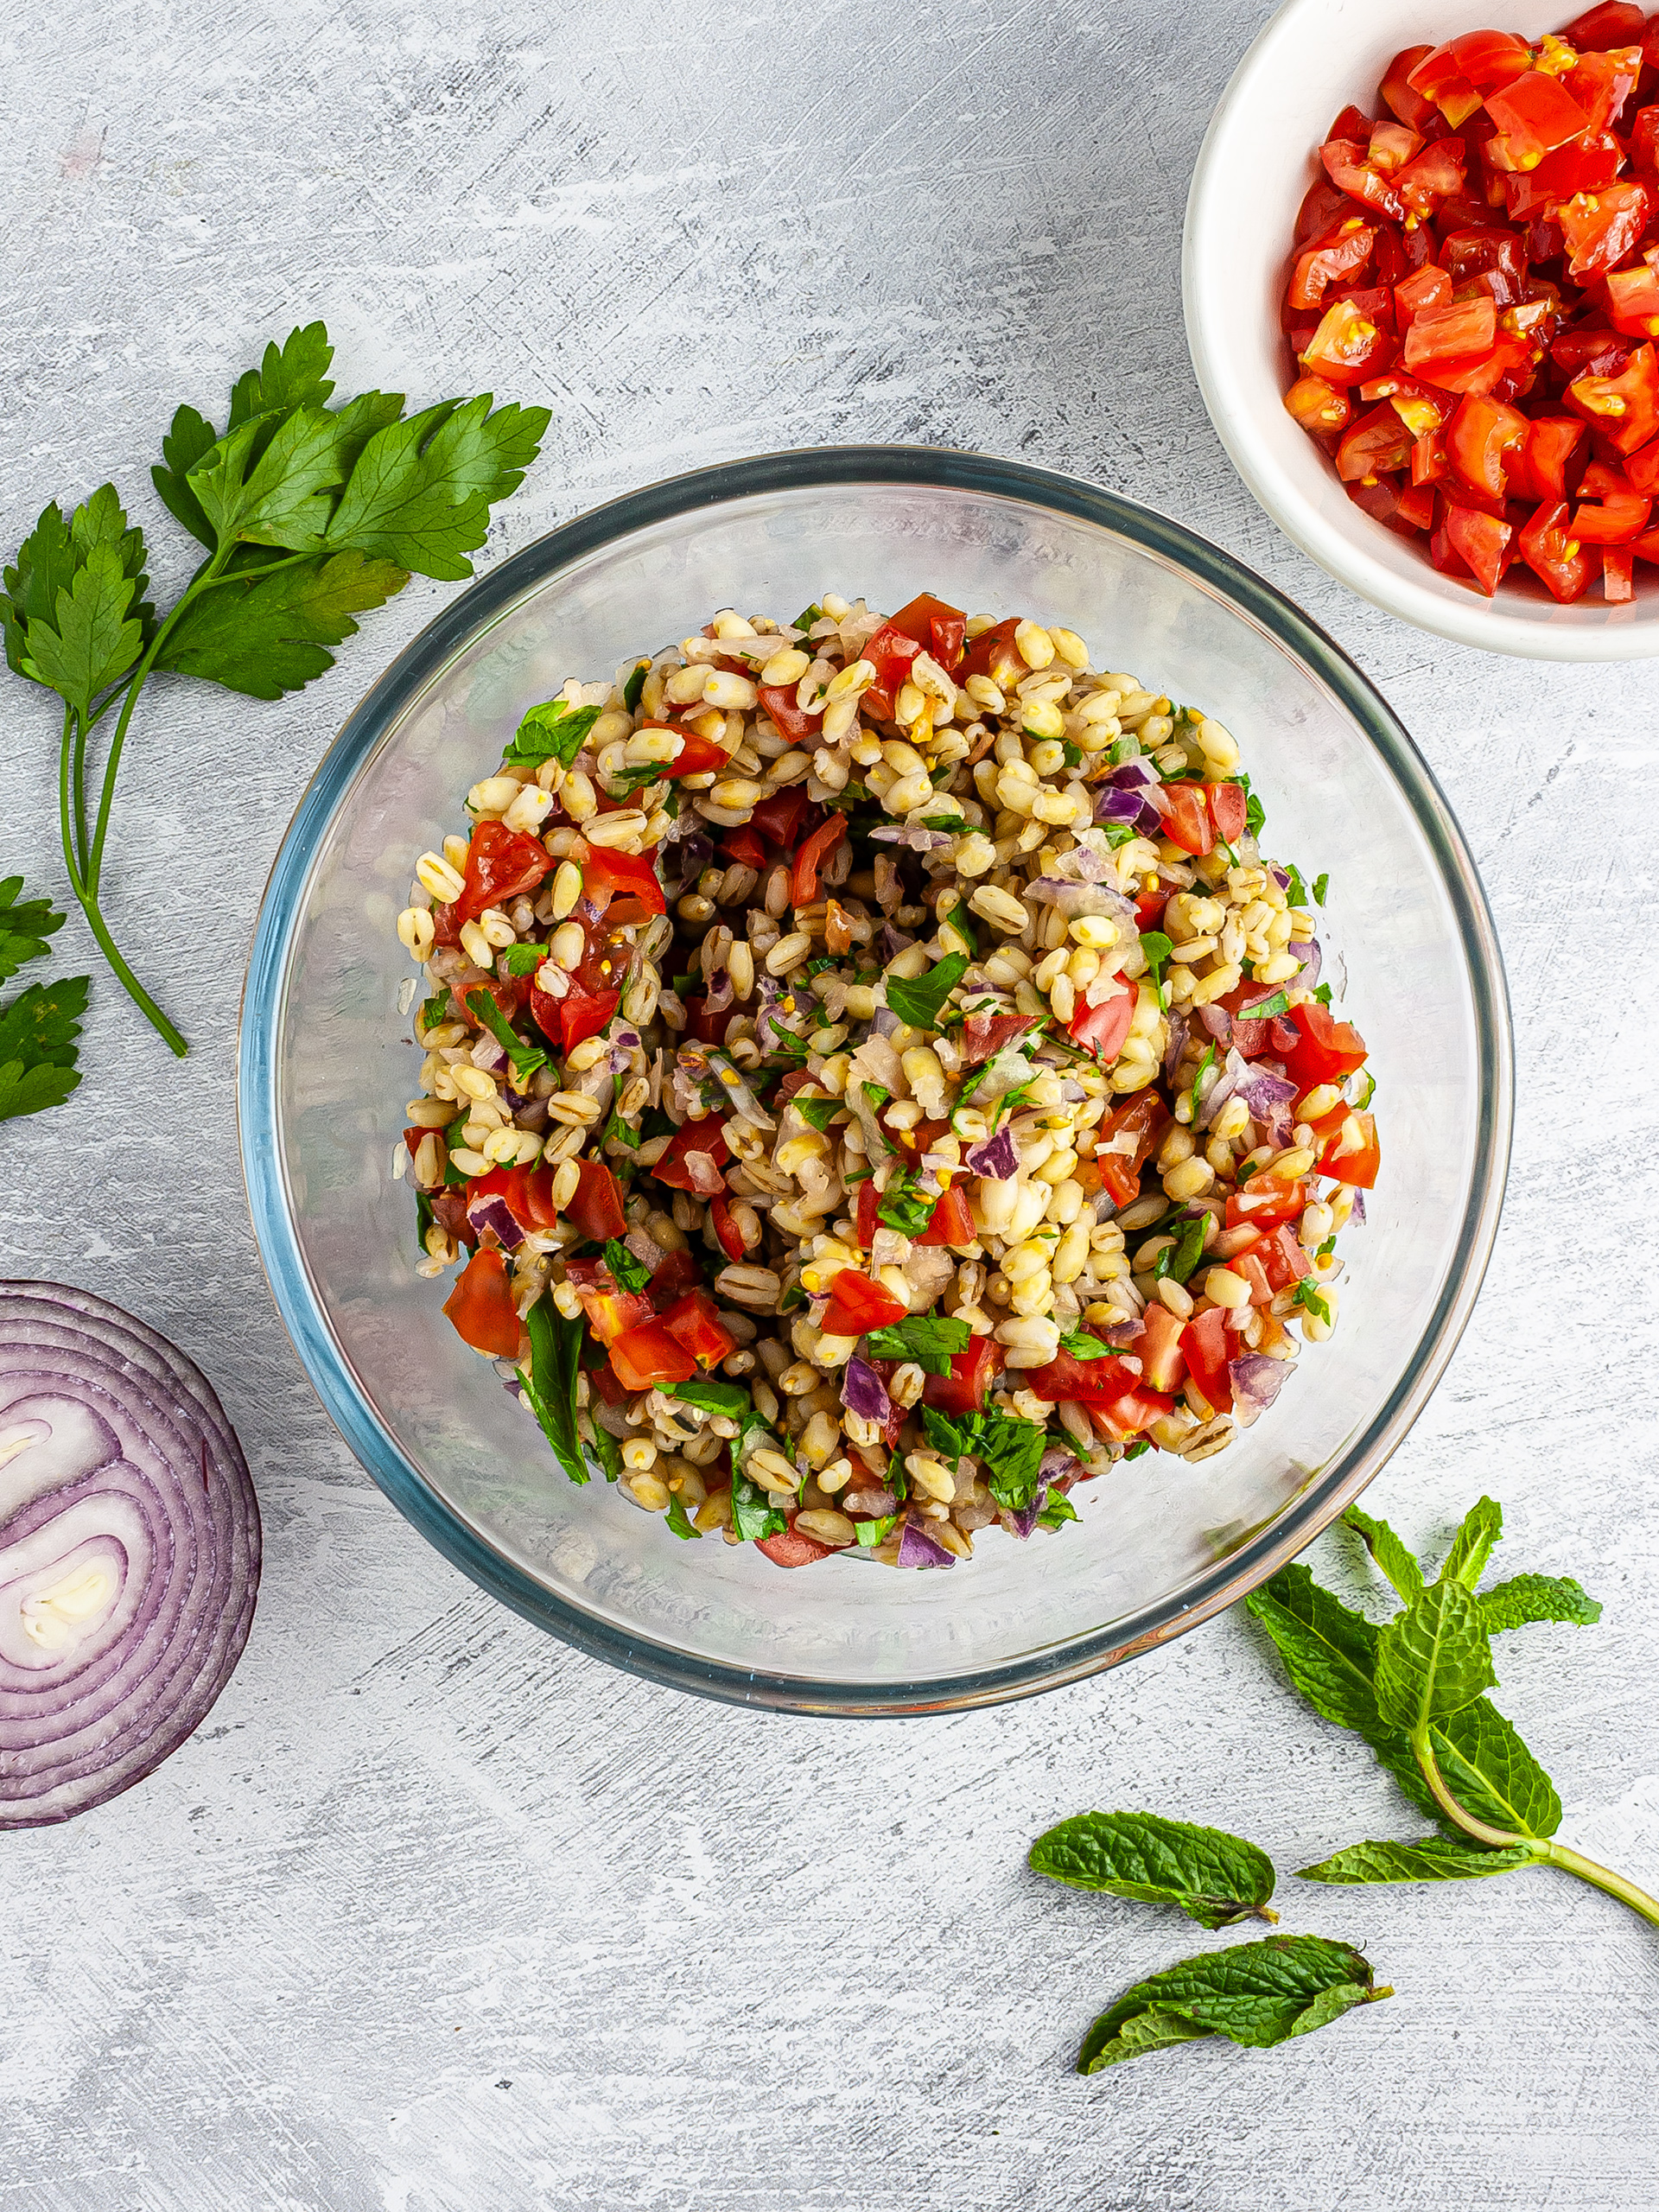 Tabbouleh salad with tomatoes, onions, mint, and parsley